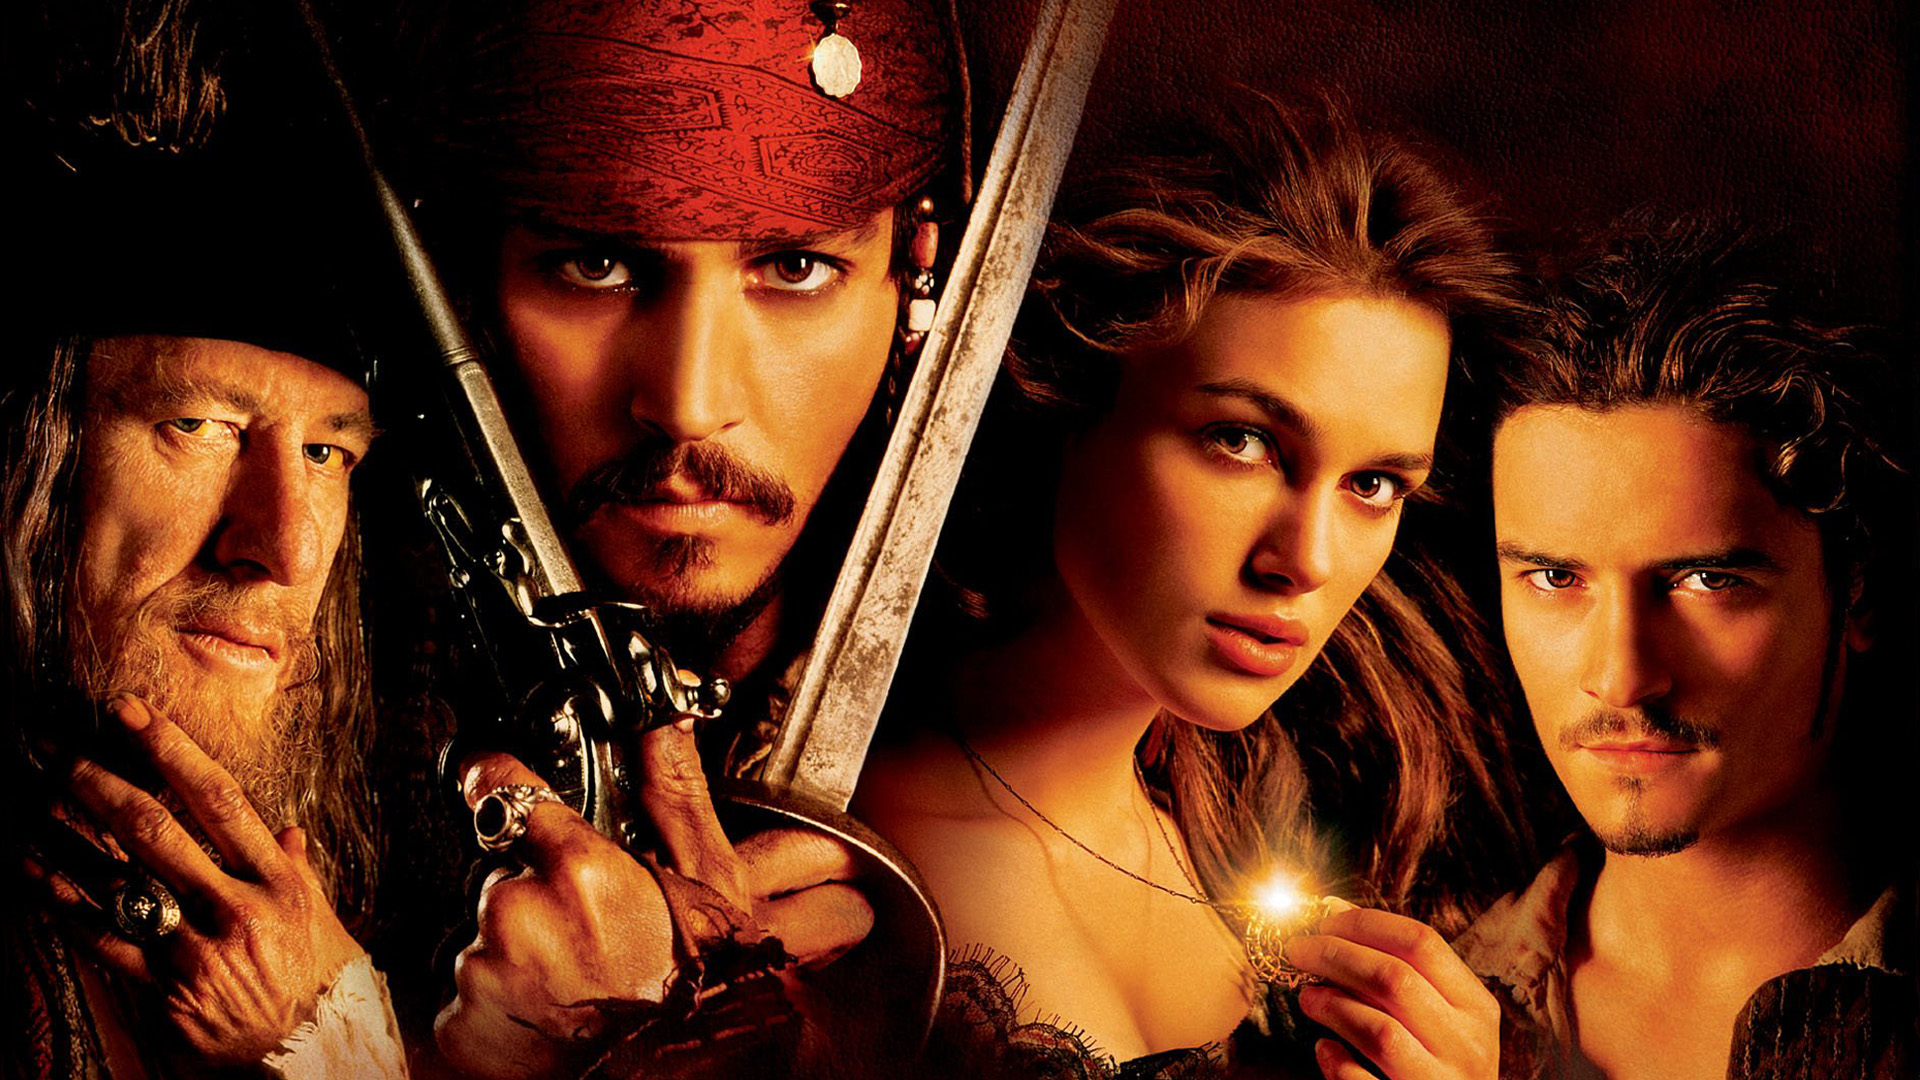 jack sparrow, pirates of the caribbean: the curse of the black pearl, keira knightley, movie, elizabeth swann, geoffrey rush, hector barbossa, johnny depp, orlando bloom, will turner, pirates of the caribbean 32K